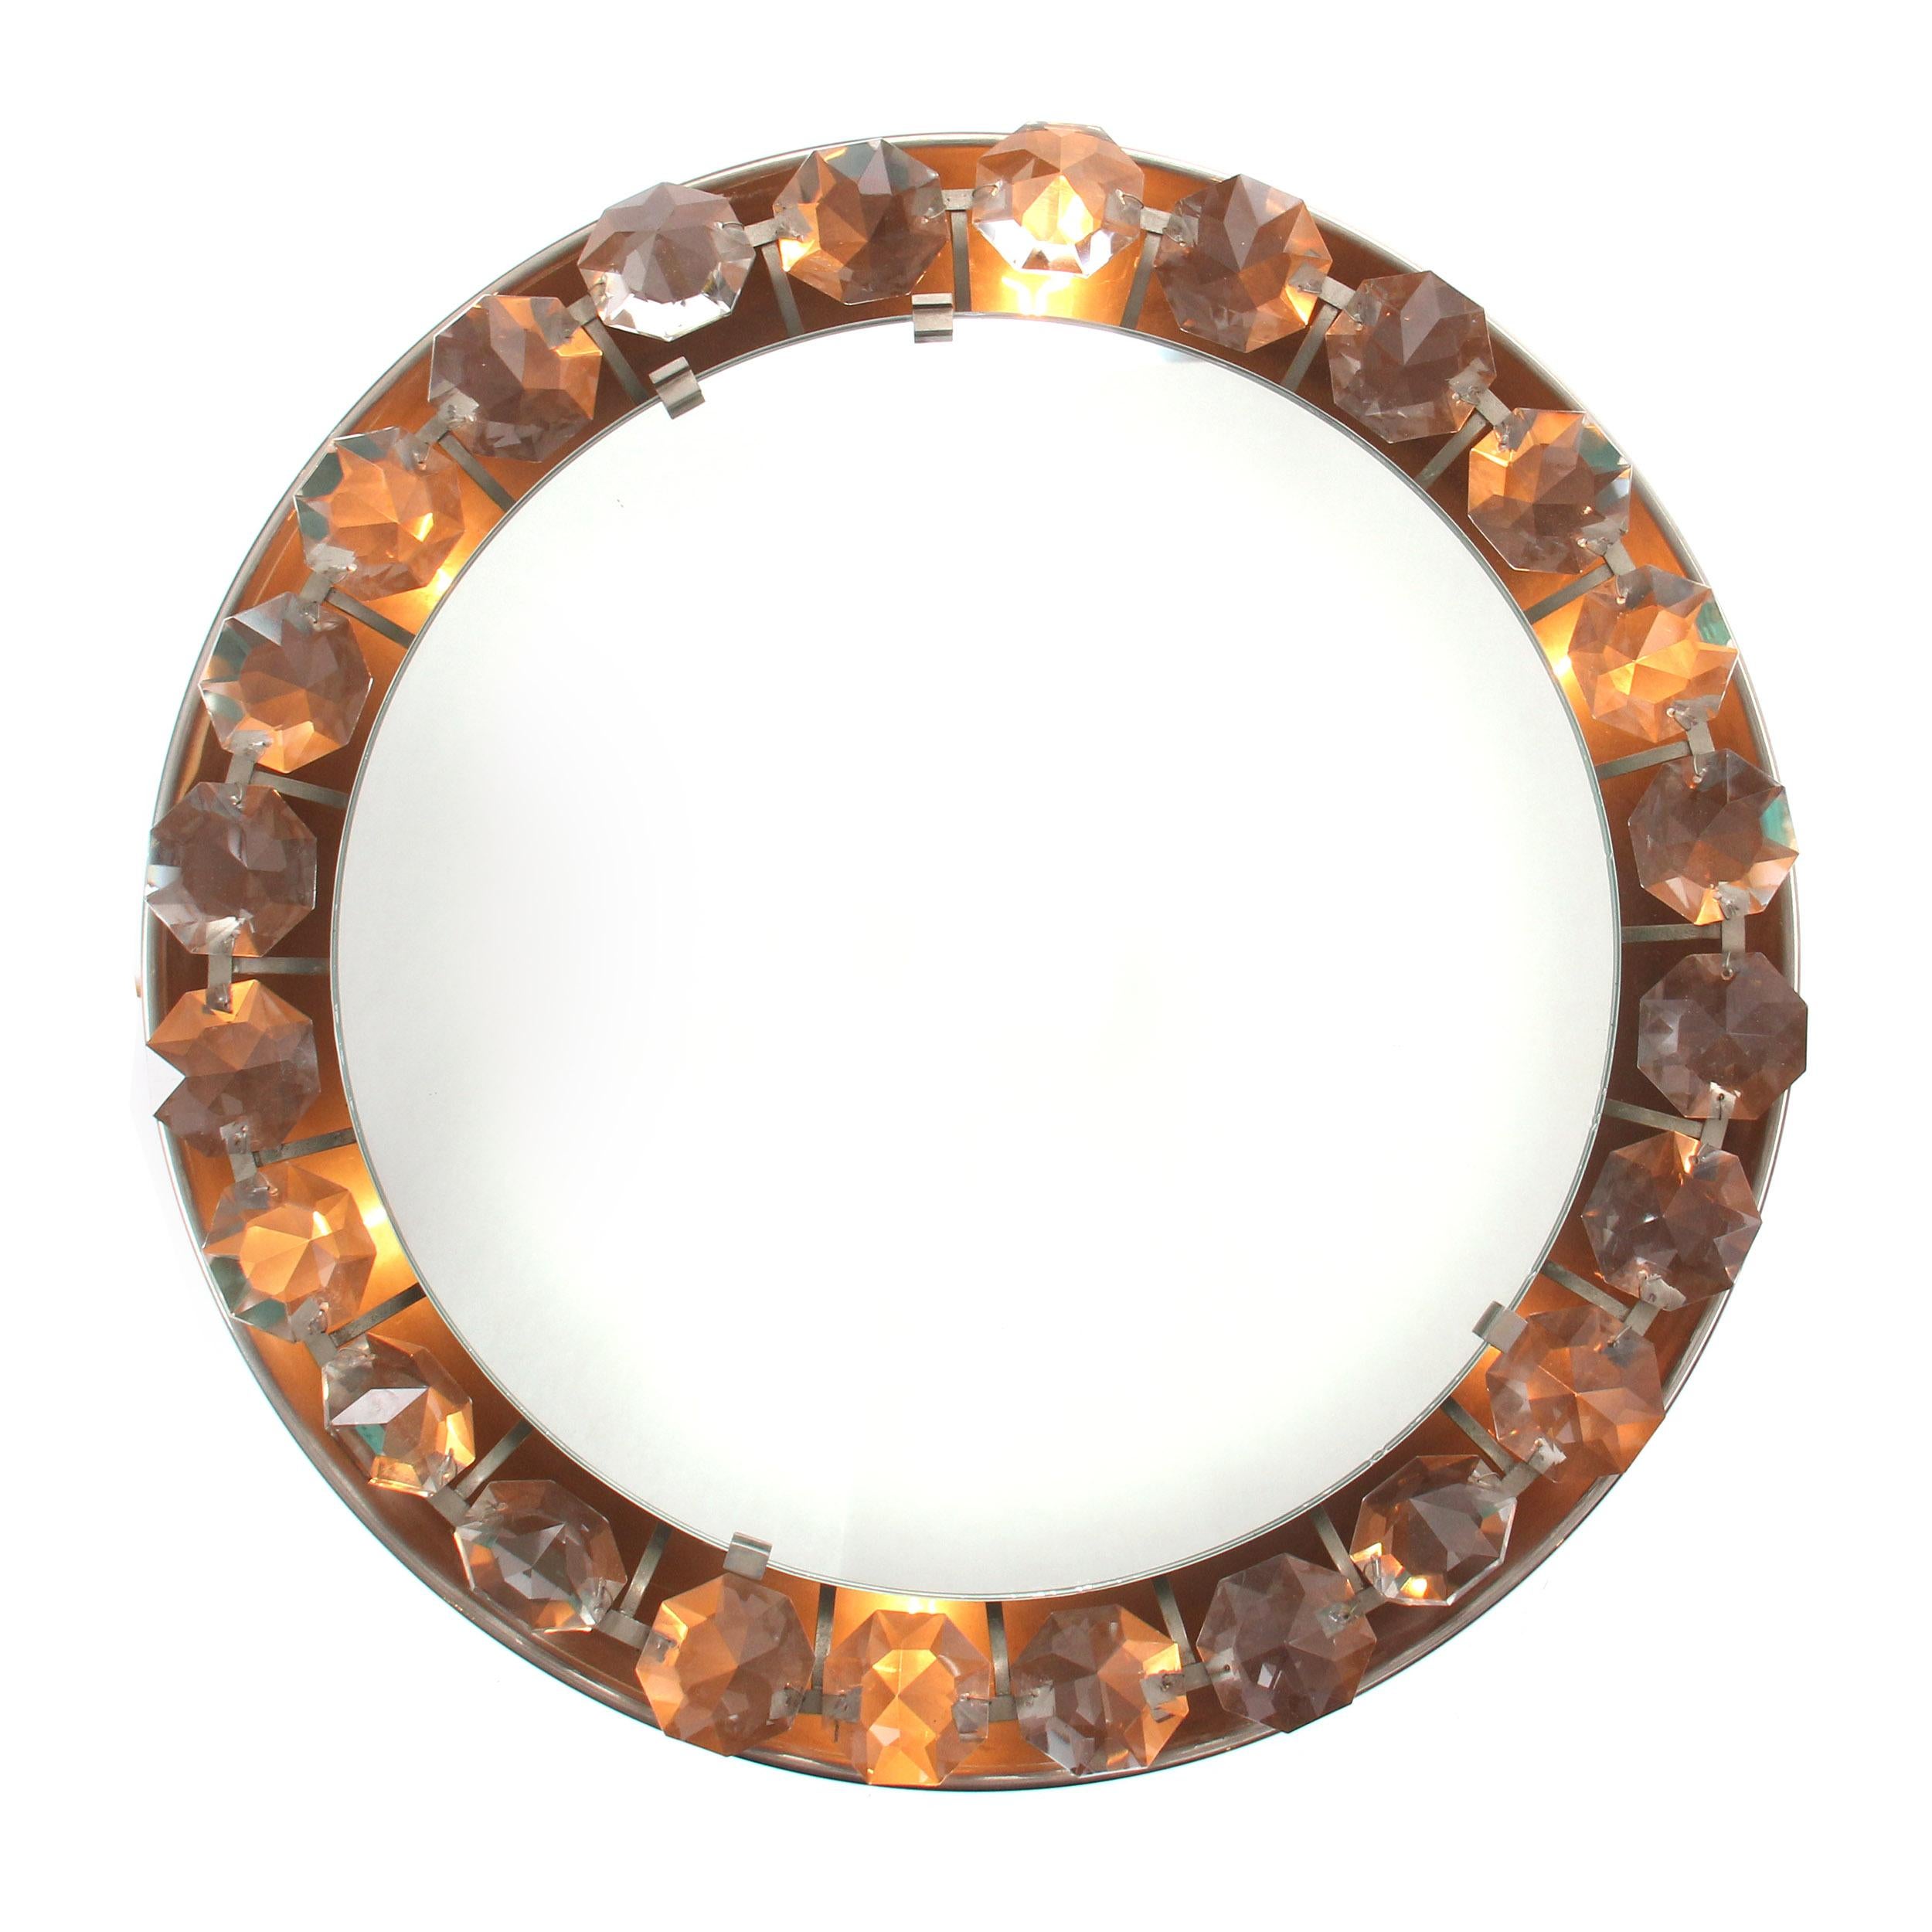 A Mid-Century Modern wall mount mirror framed by a row of large back lit crystals. Made in the USA, circa 1950s.